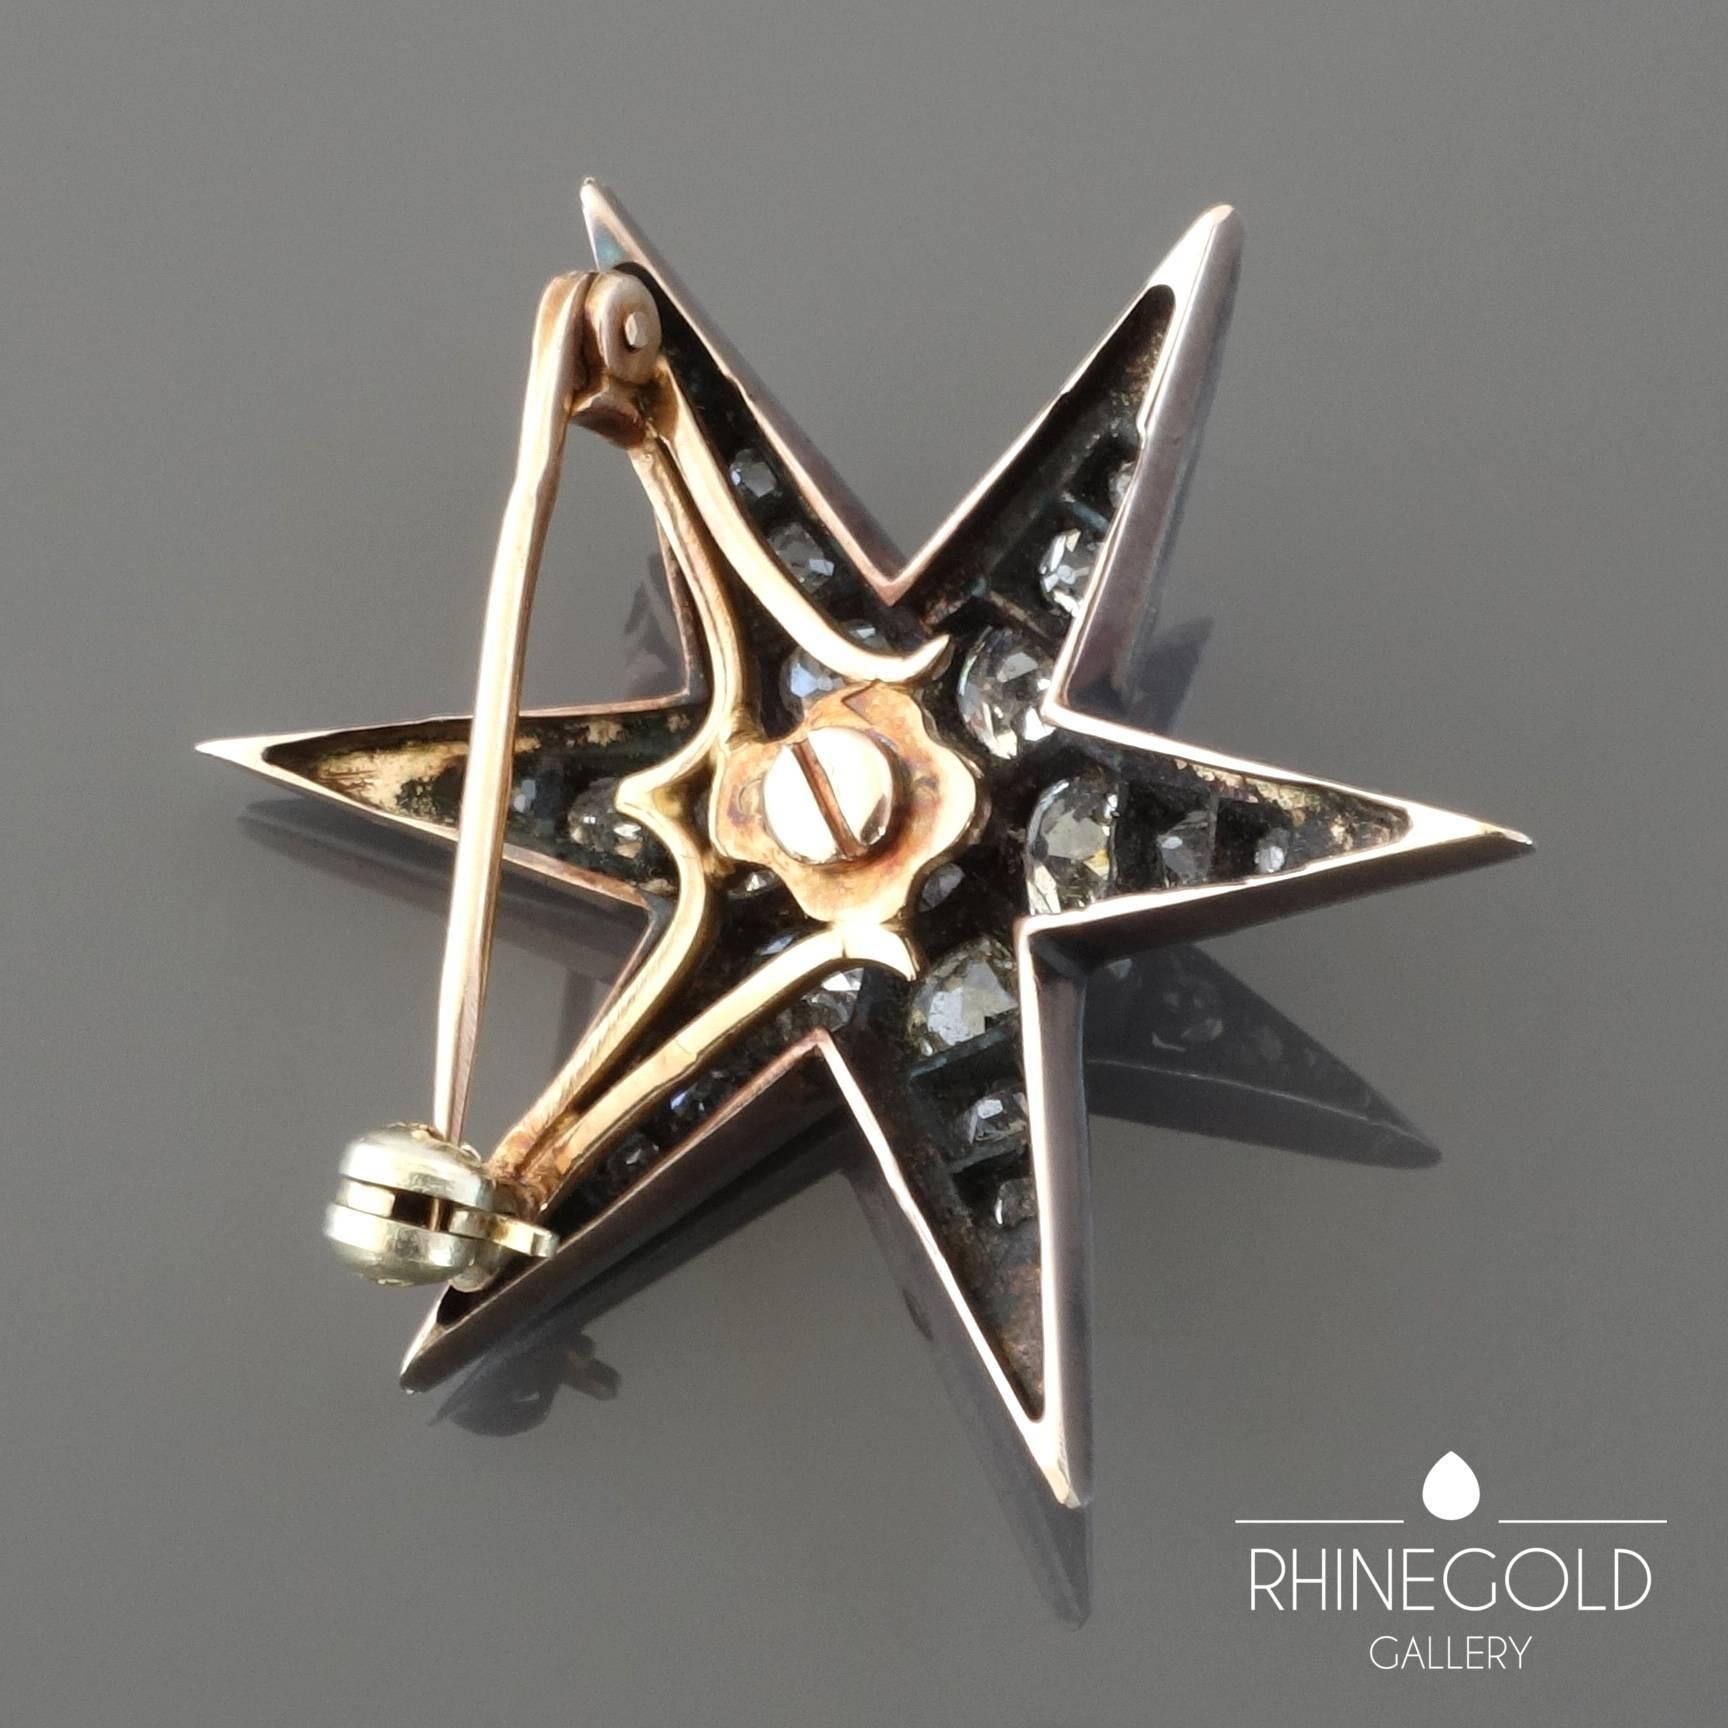 Antique French Old-Cut Diamond Silver on Gold Star Brooch
Silver, 18k rose gold, 25 old cut diamonds estimated to weigh a total of approx. 2 carats (vvs-vs; tinted)
Diameter 1 5/16”
Weight 6.8 grams
Marks: on the star French mark for items made